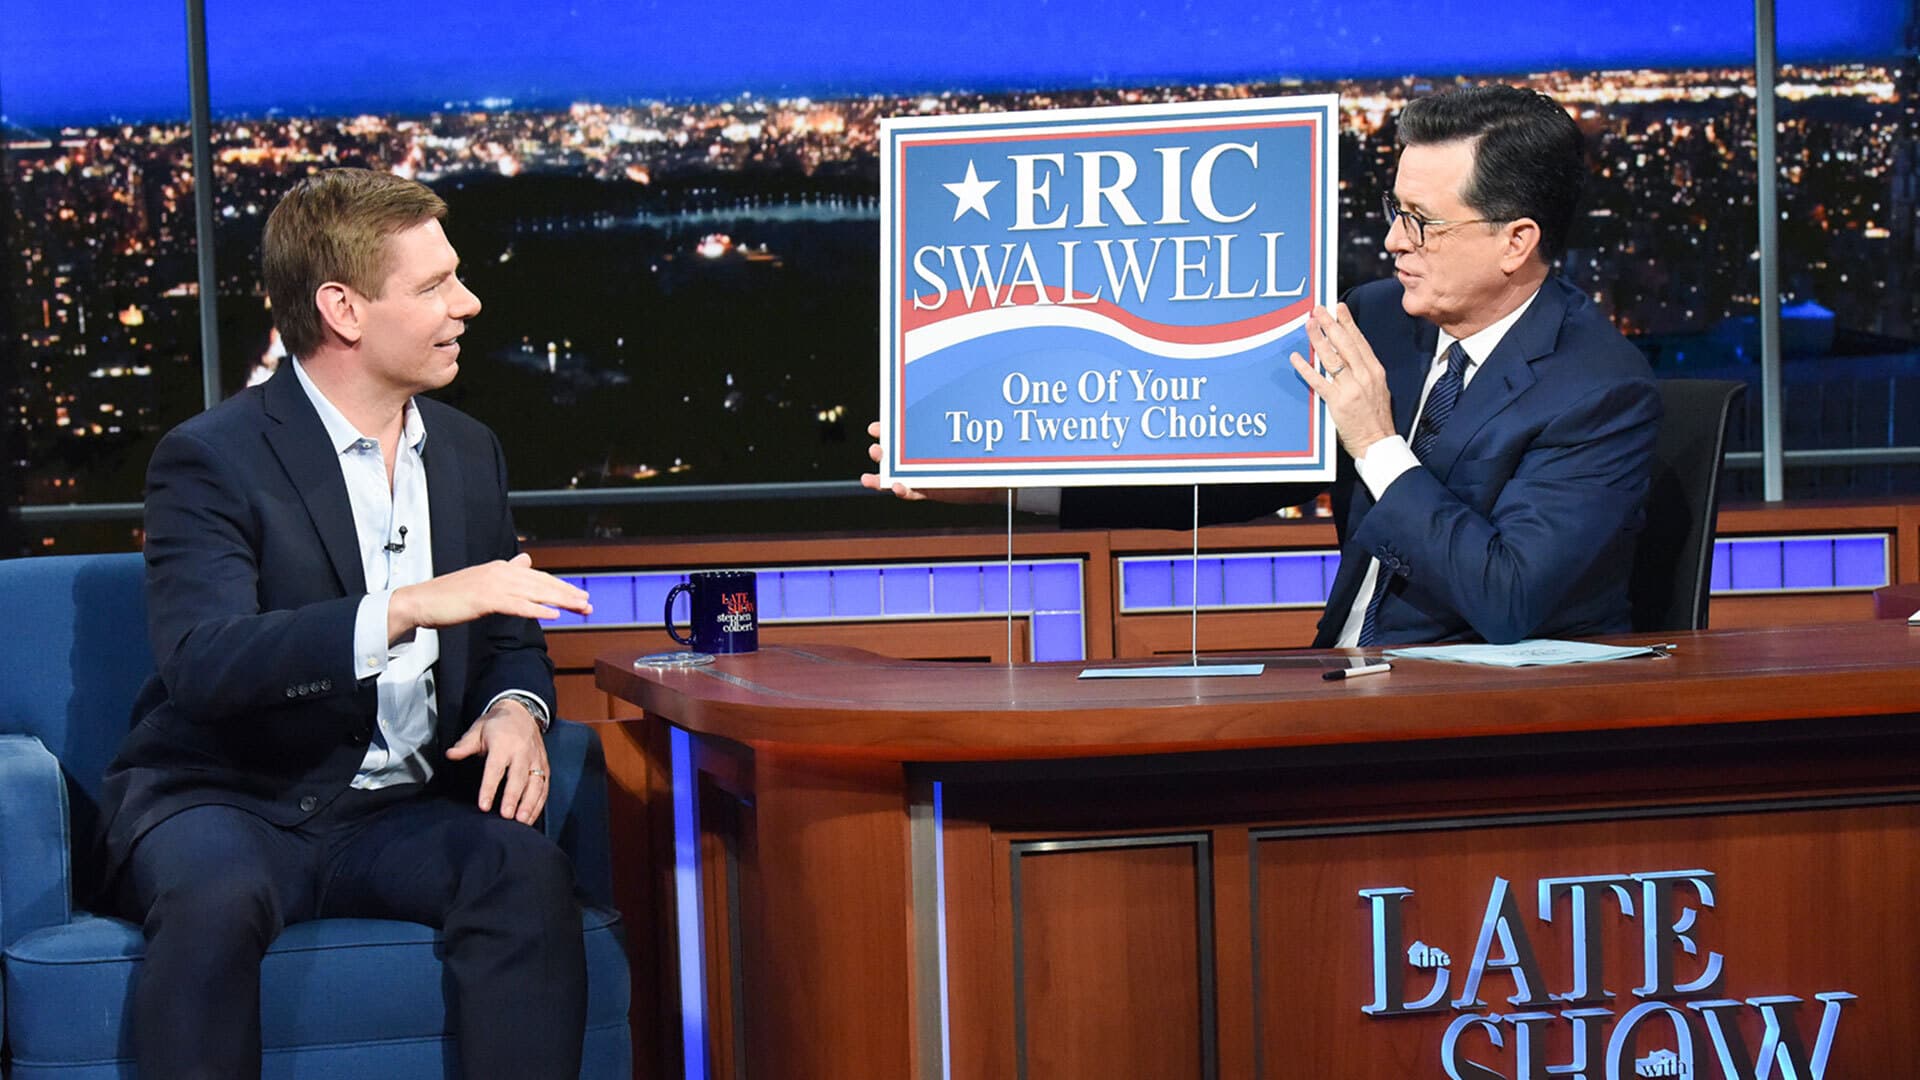 Eric Swalwell on "The Late Show with Stephen Colbert"